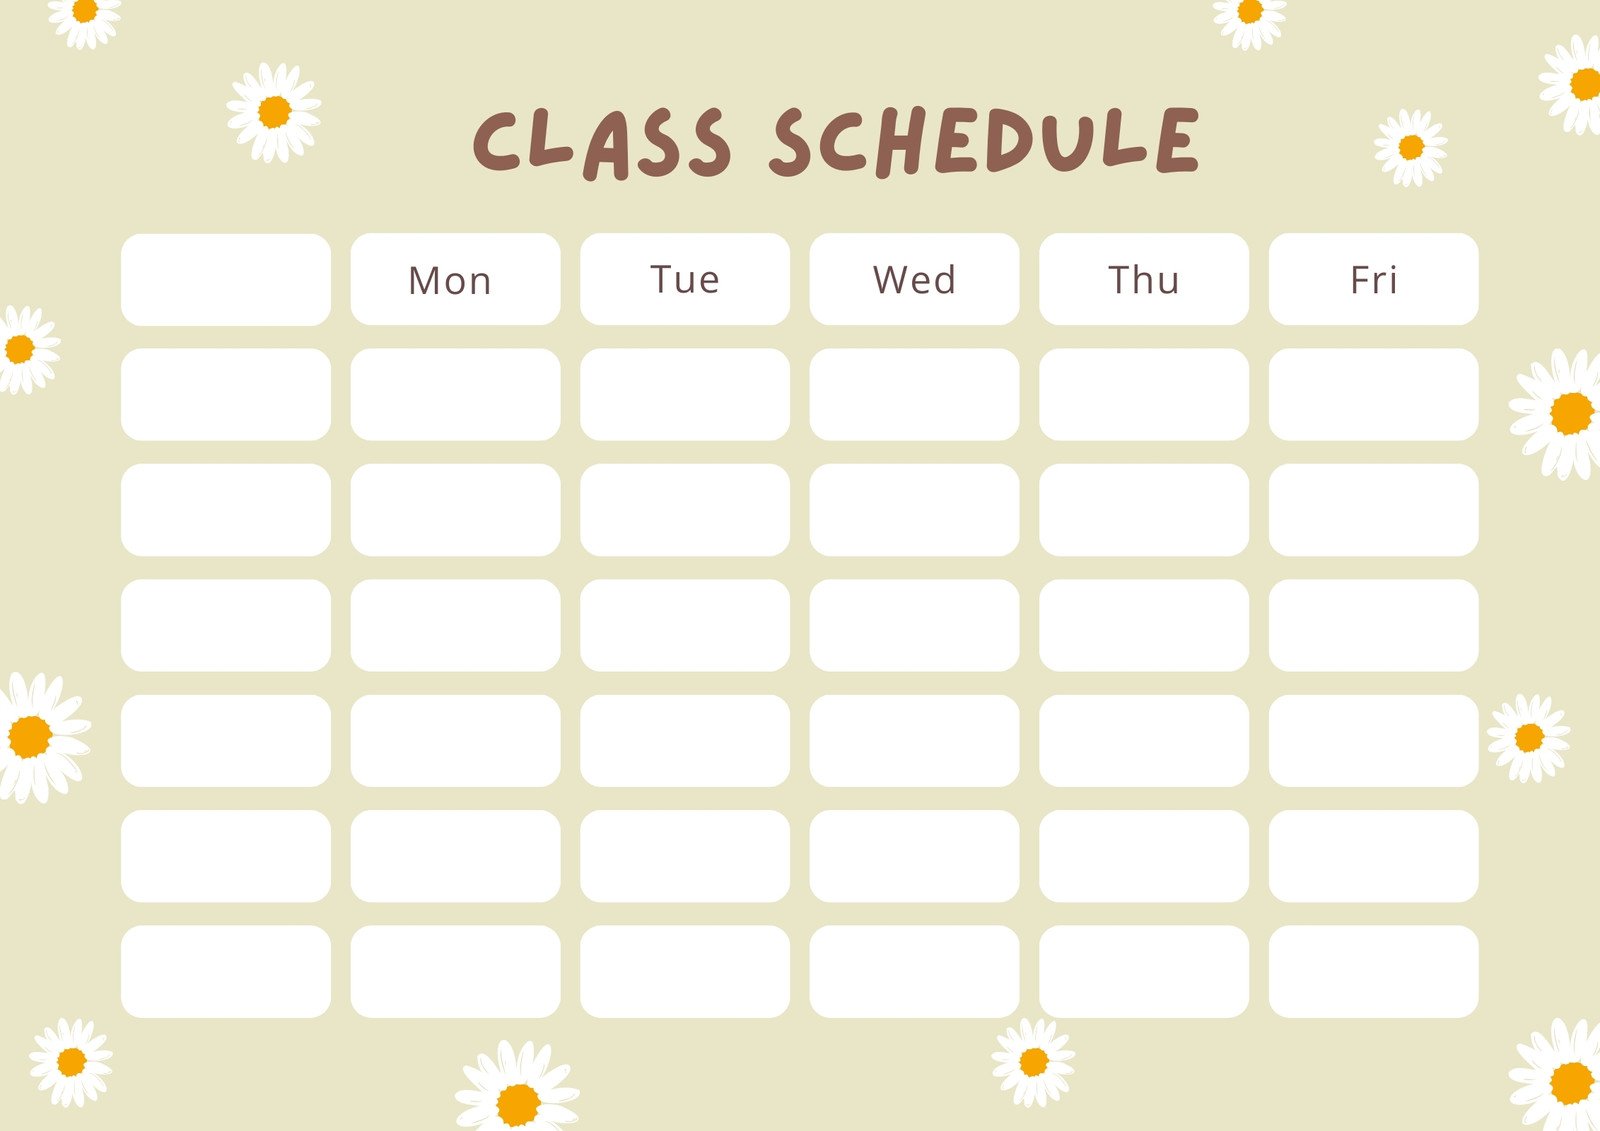 Class Schedule in Beige White Daisy Floral Style 